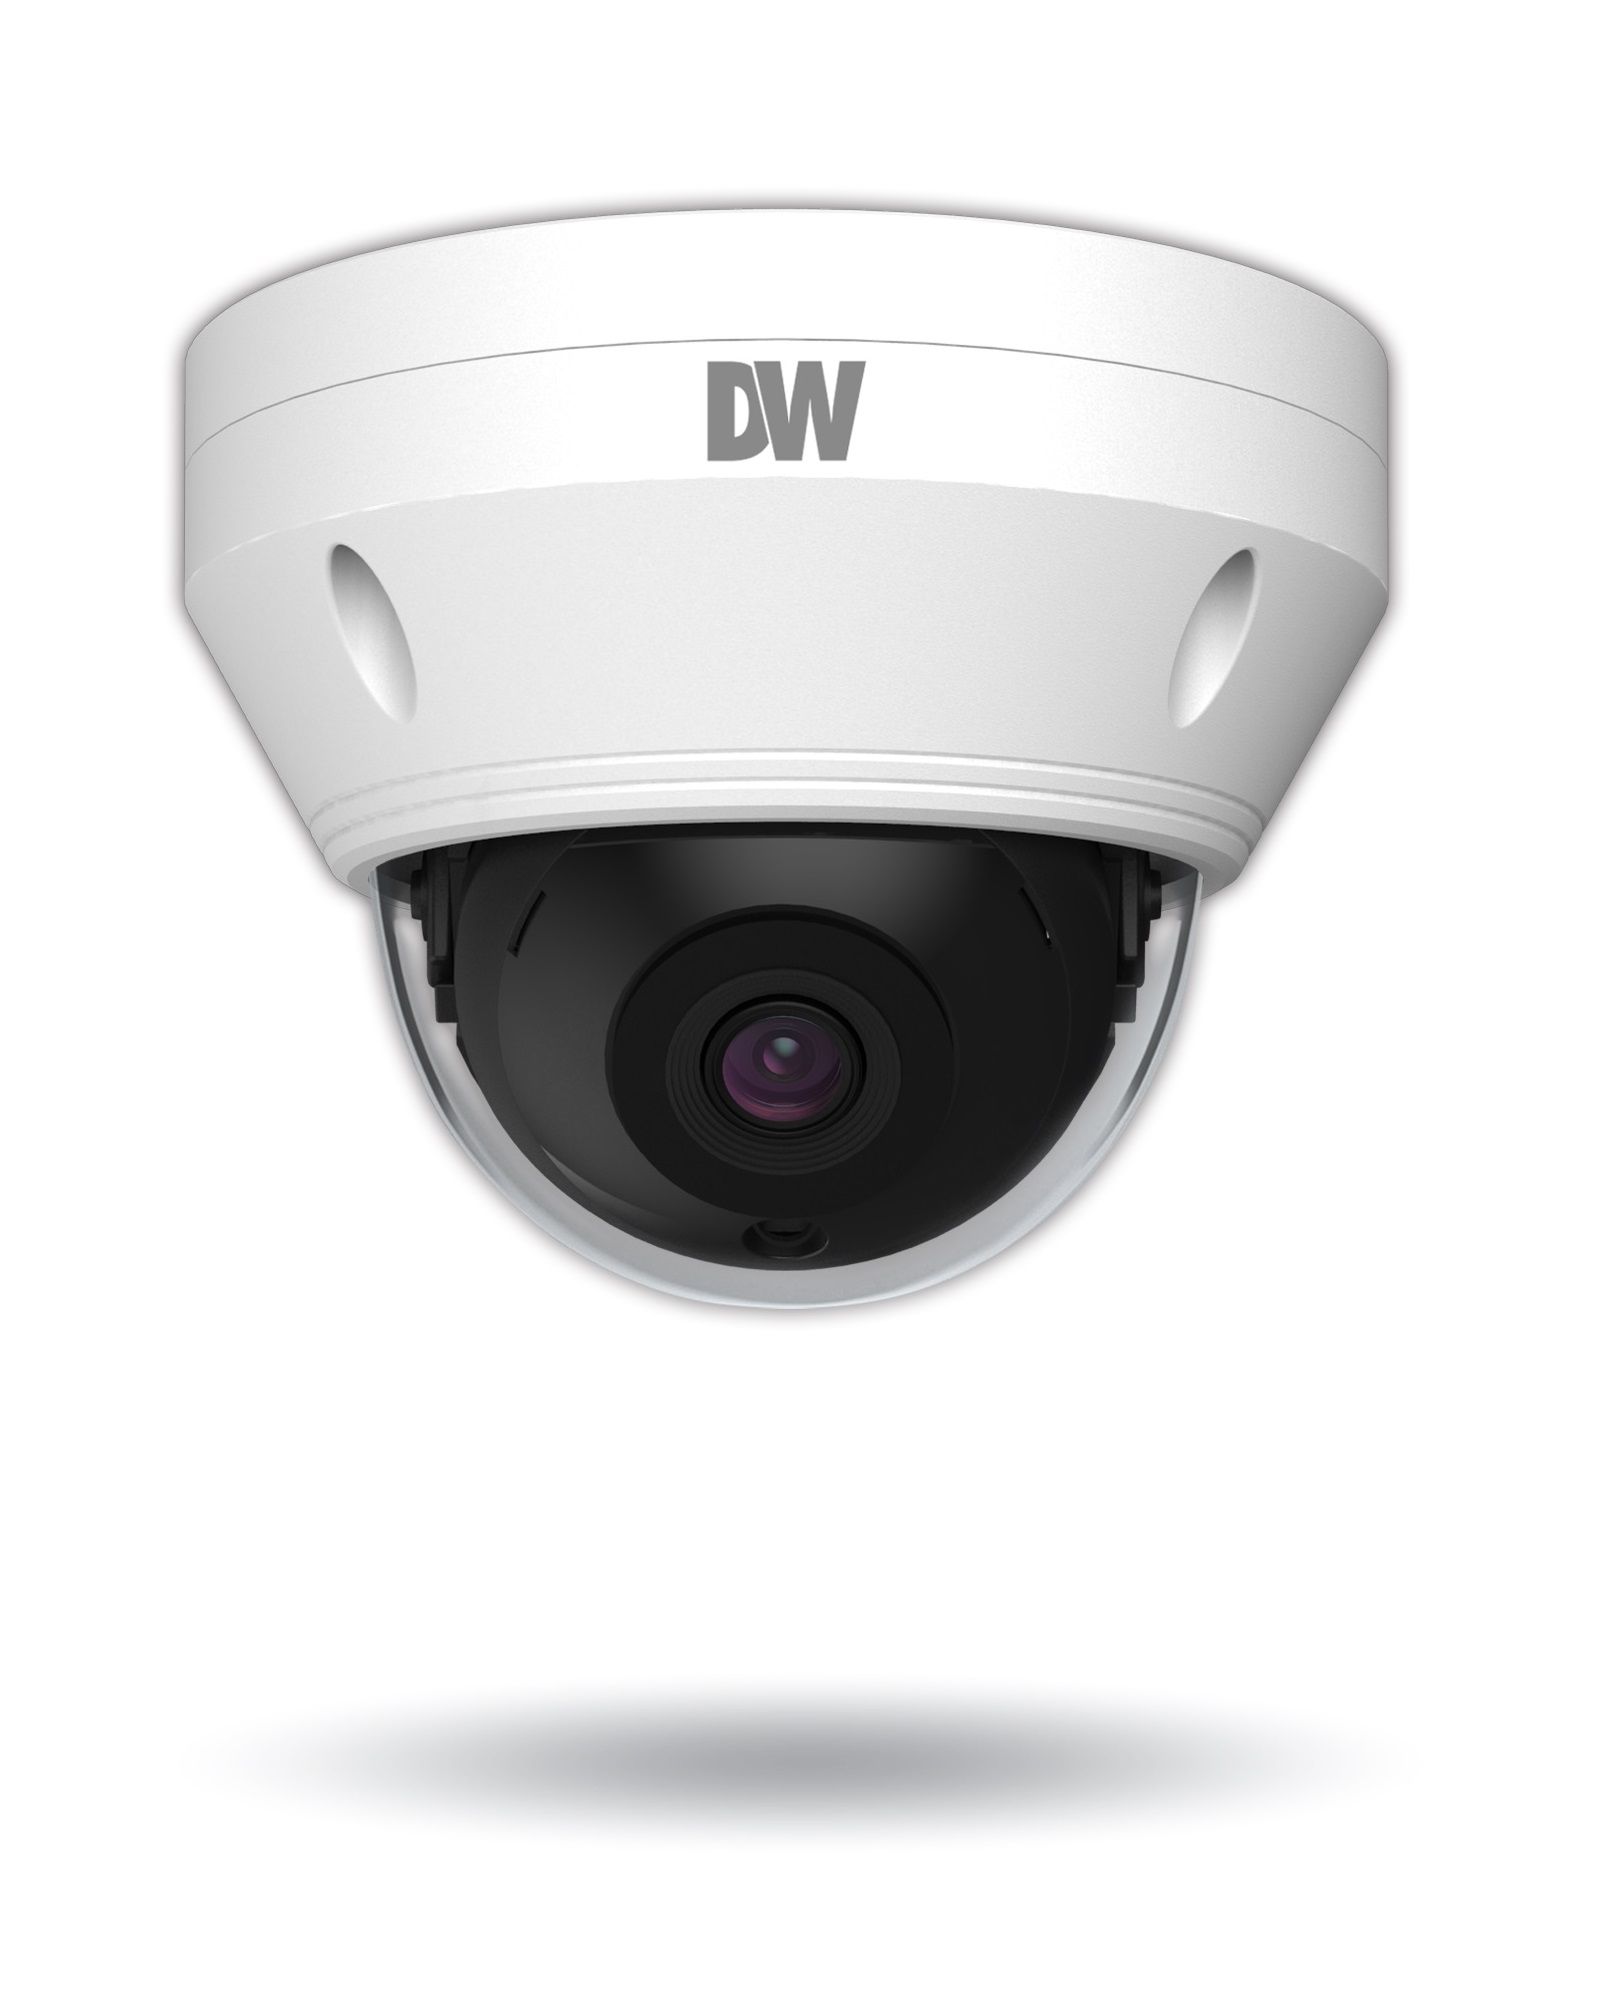 DWC-MV94WI28T | MEGApix 4MP vandal dome IP camera with fixed lens options and IR